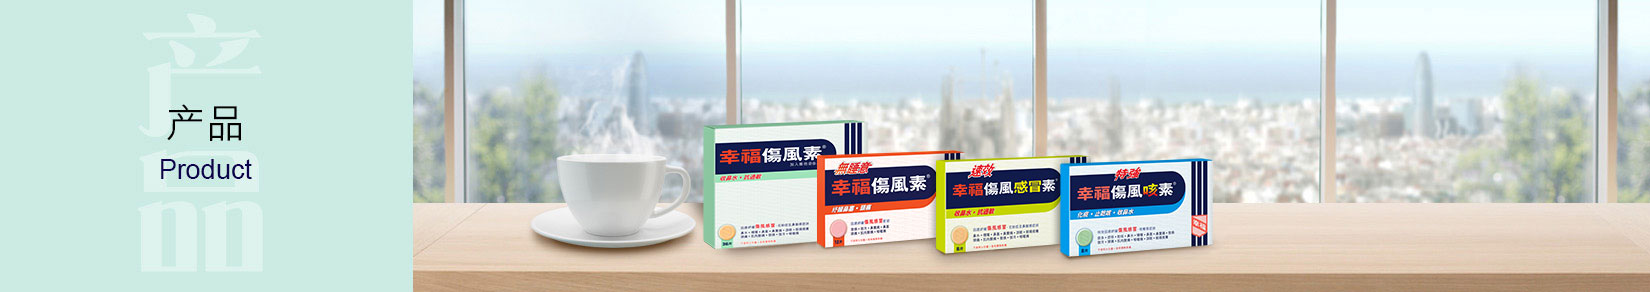 product_banner_YL-product-update-CN.jpg